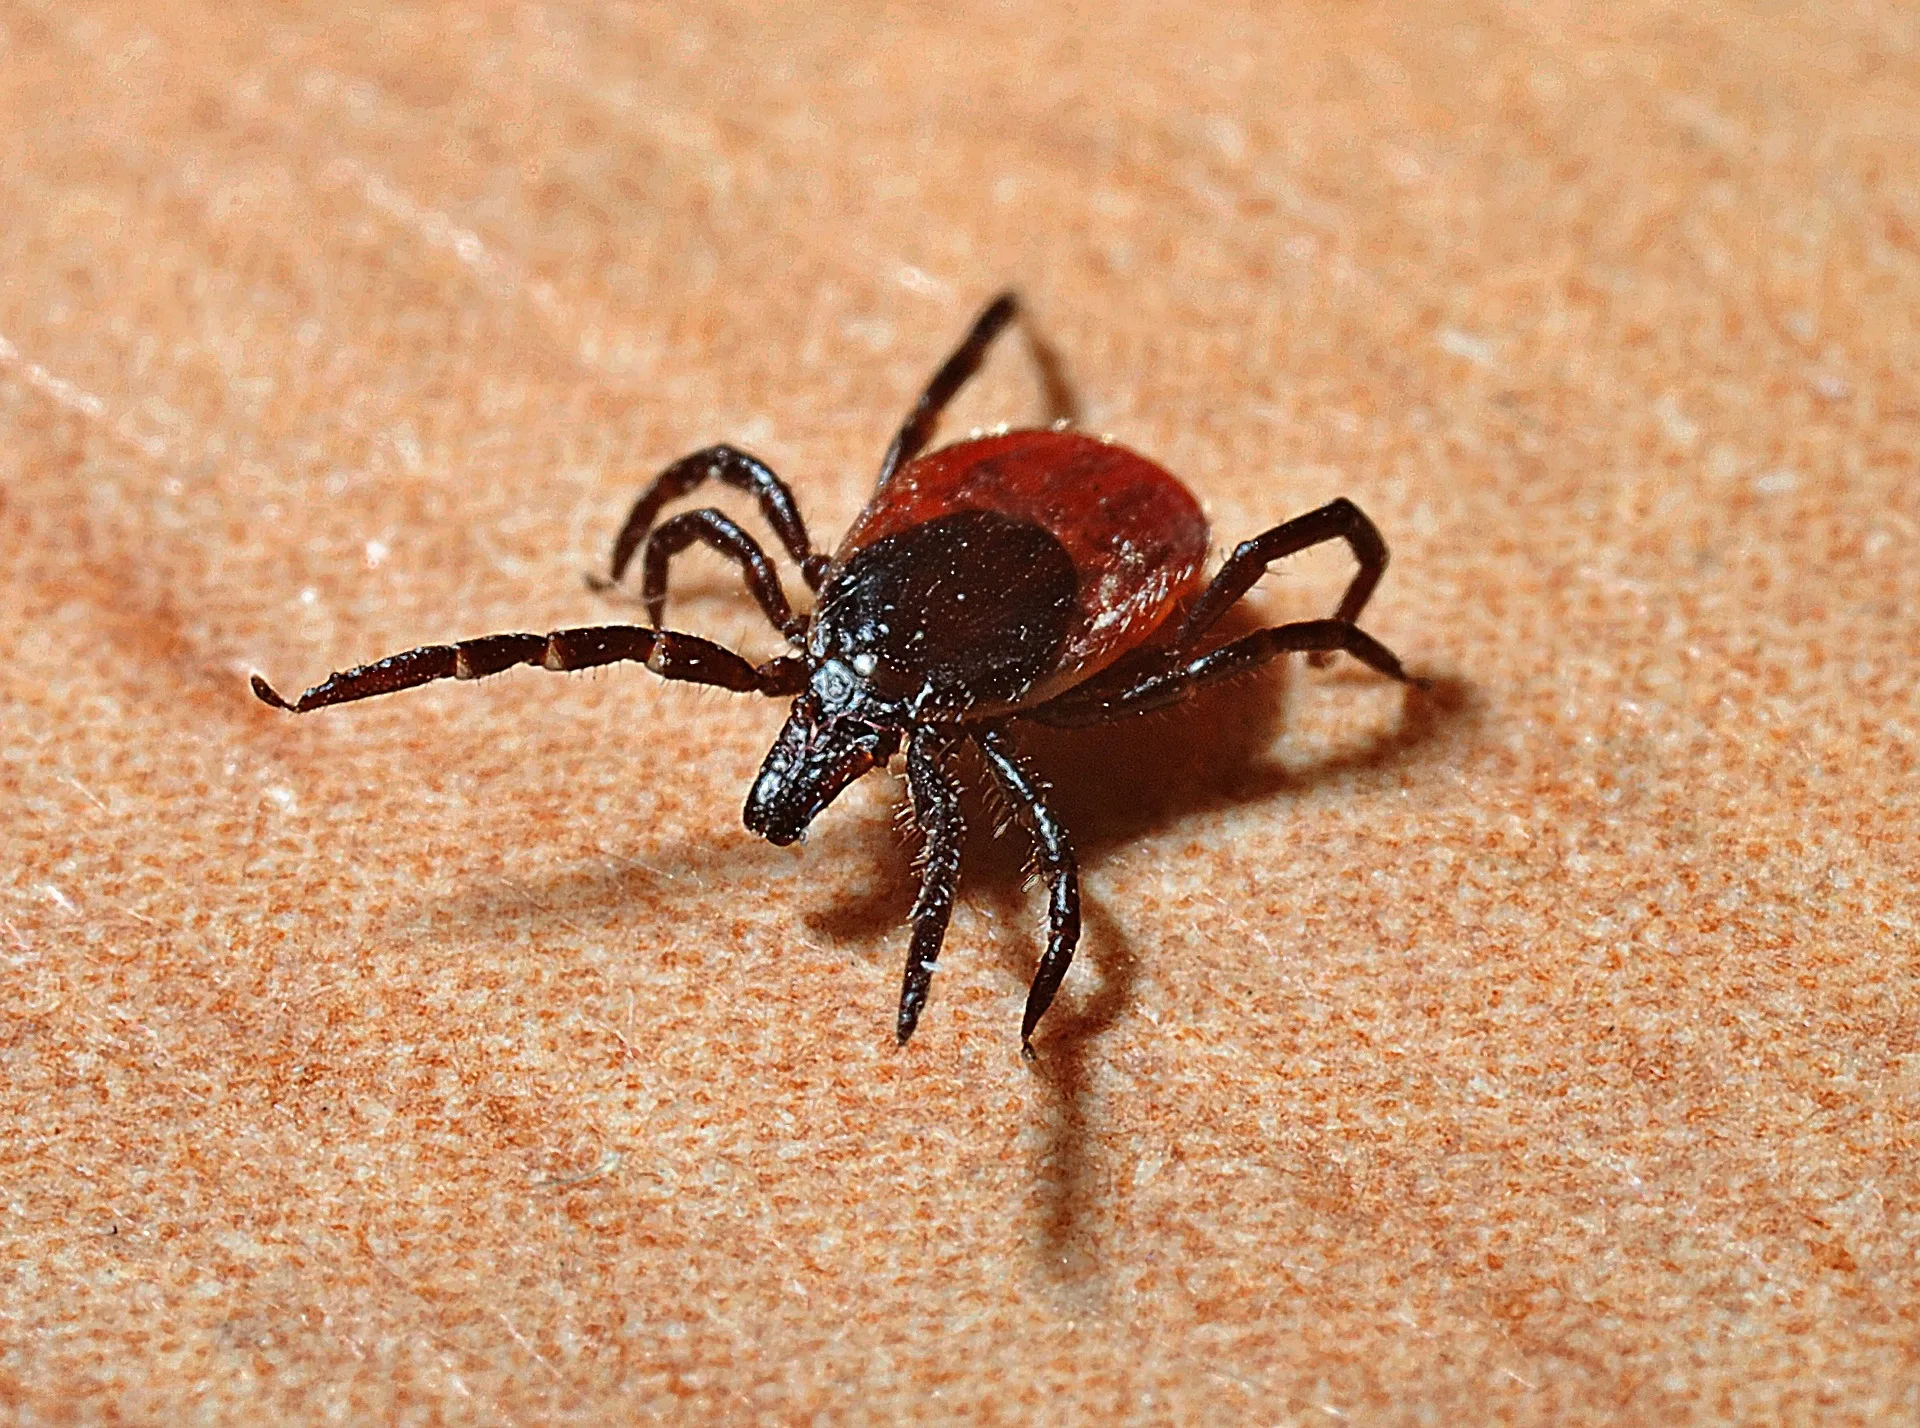 Are We Getting A Lyme Disease Vaccine By 2025?